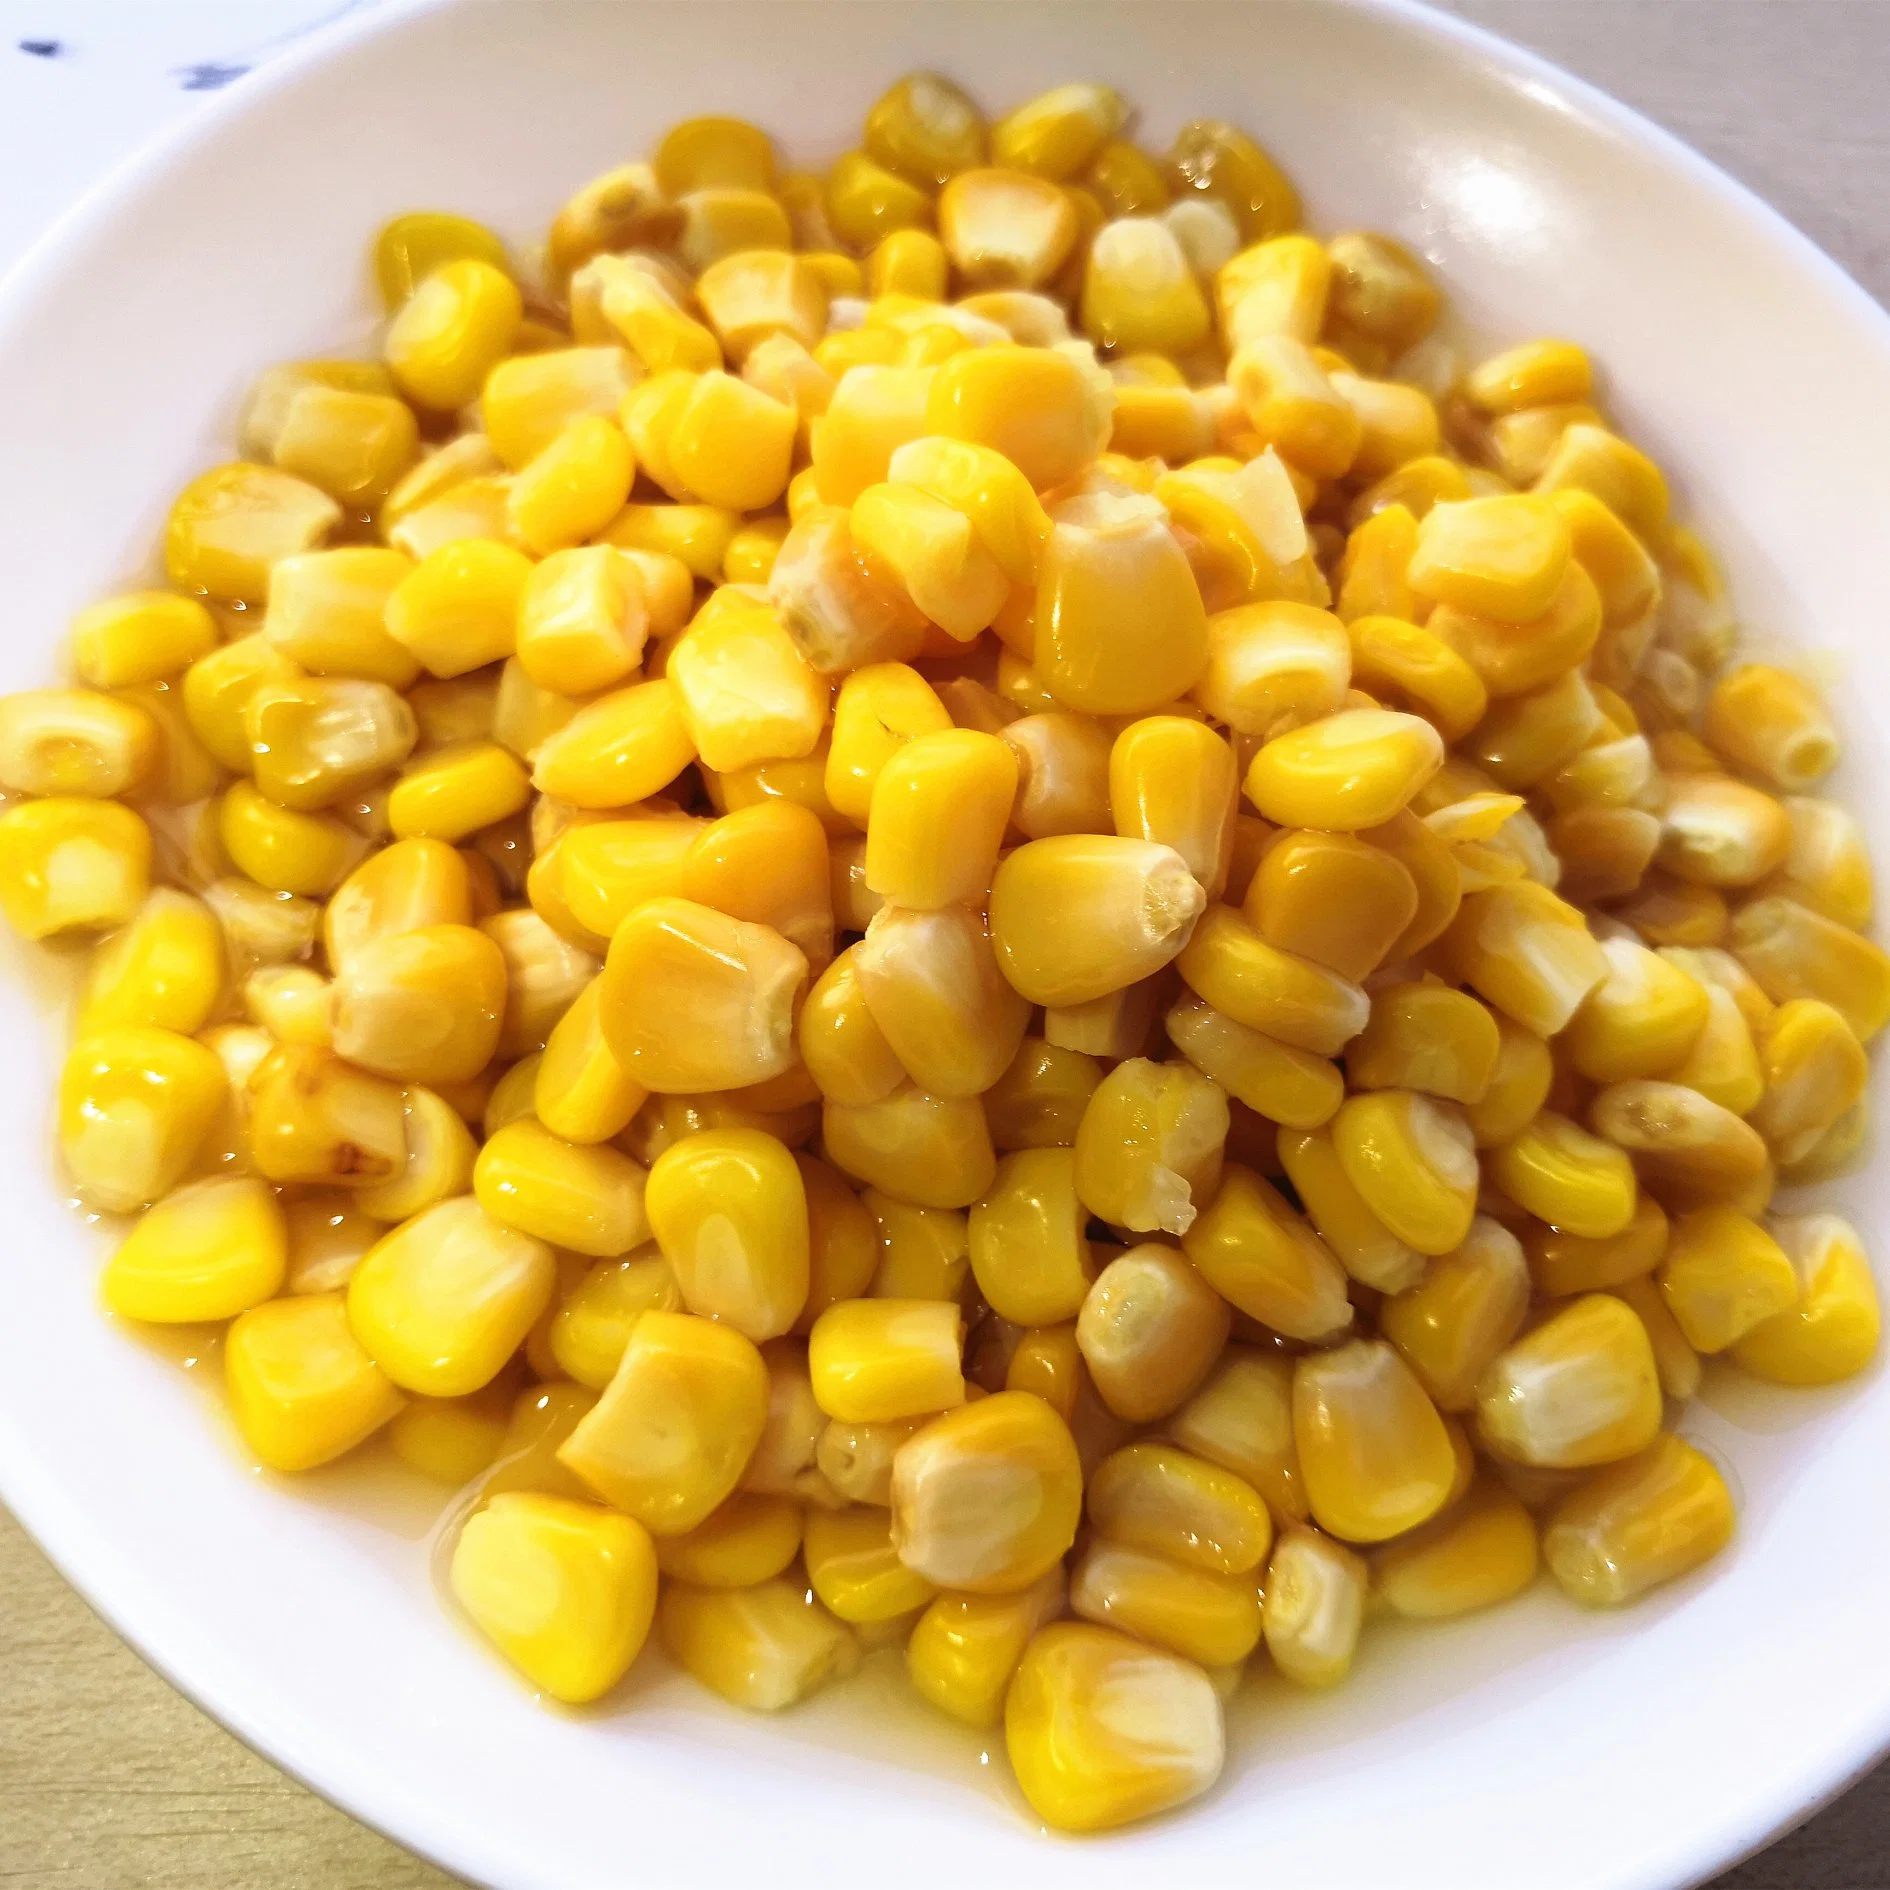 High quality/High cost performance Canned Sweet Corn in Syrup 340g 400g